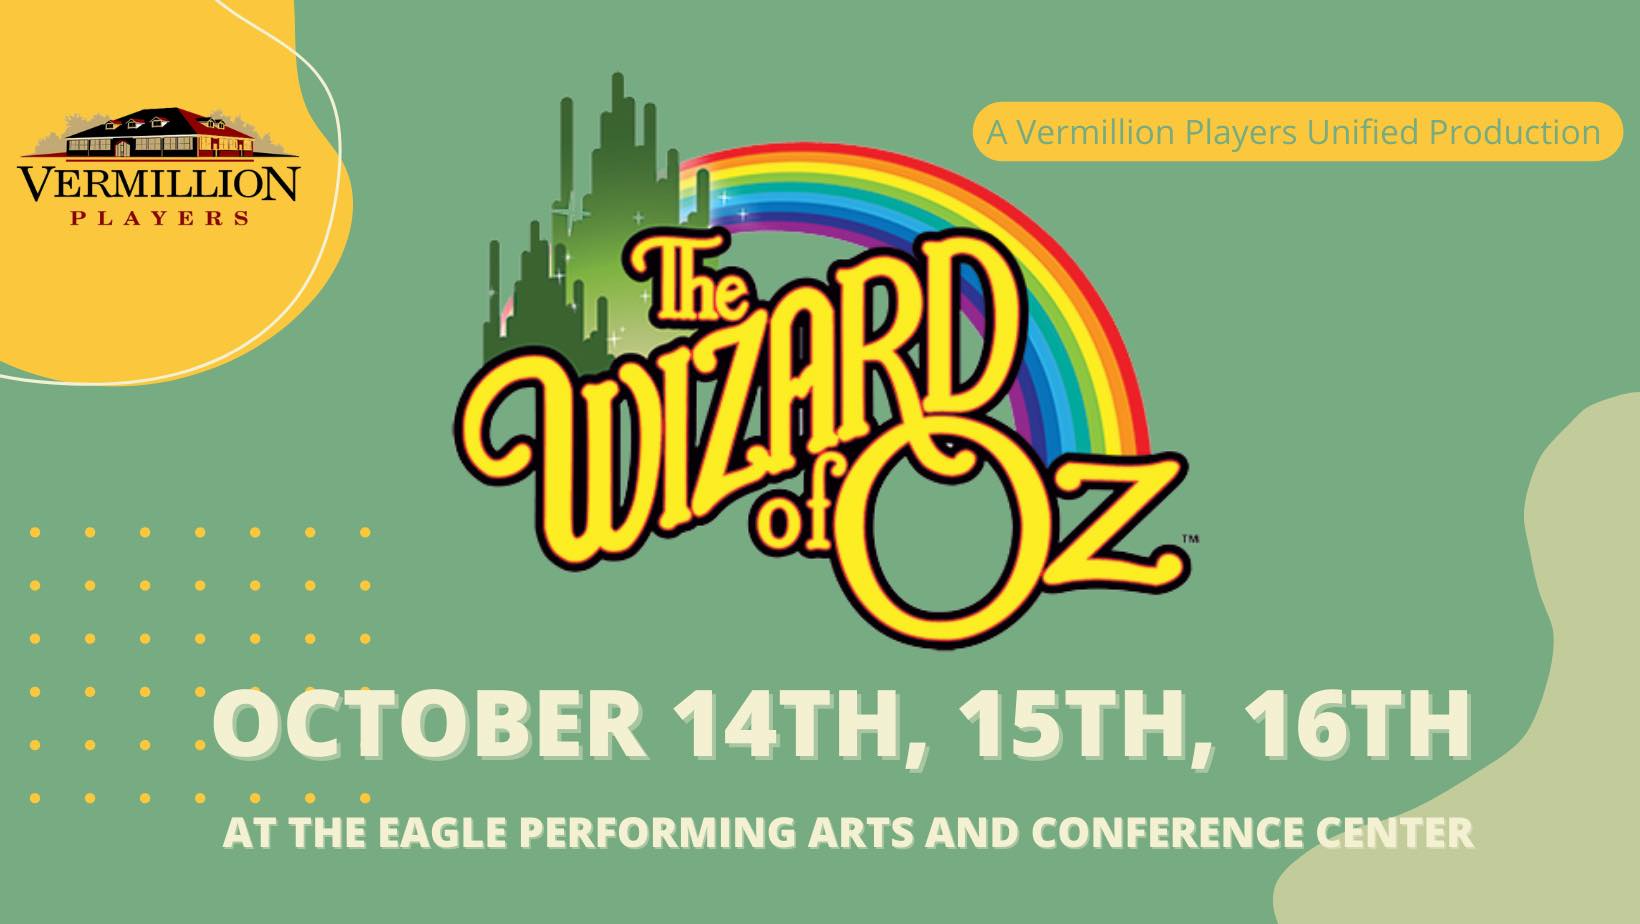 Wizard of Oz at the Eagle Performing Arts and Conference Center